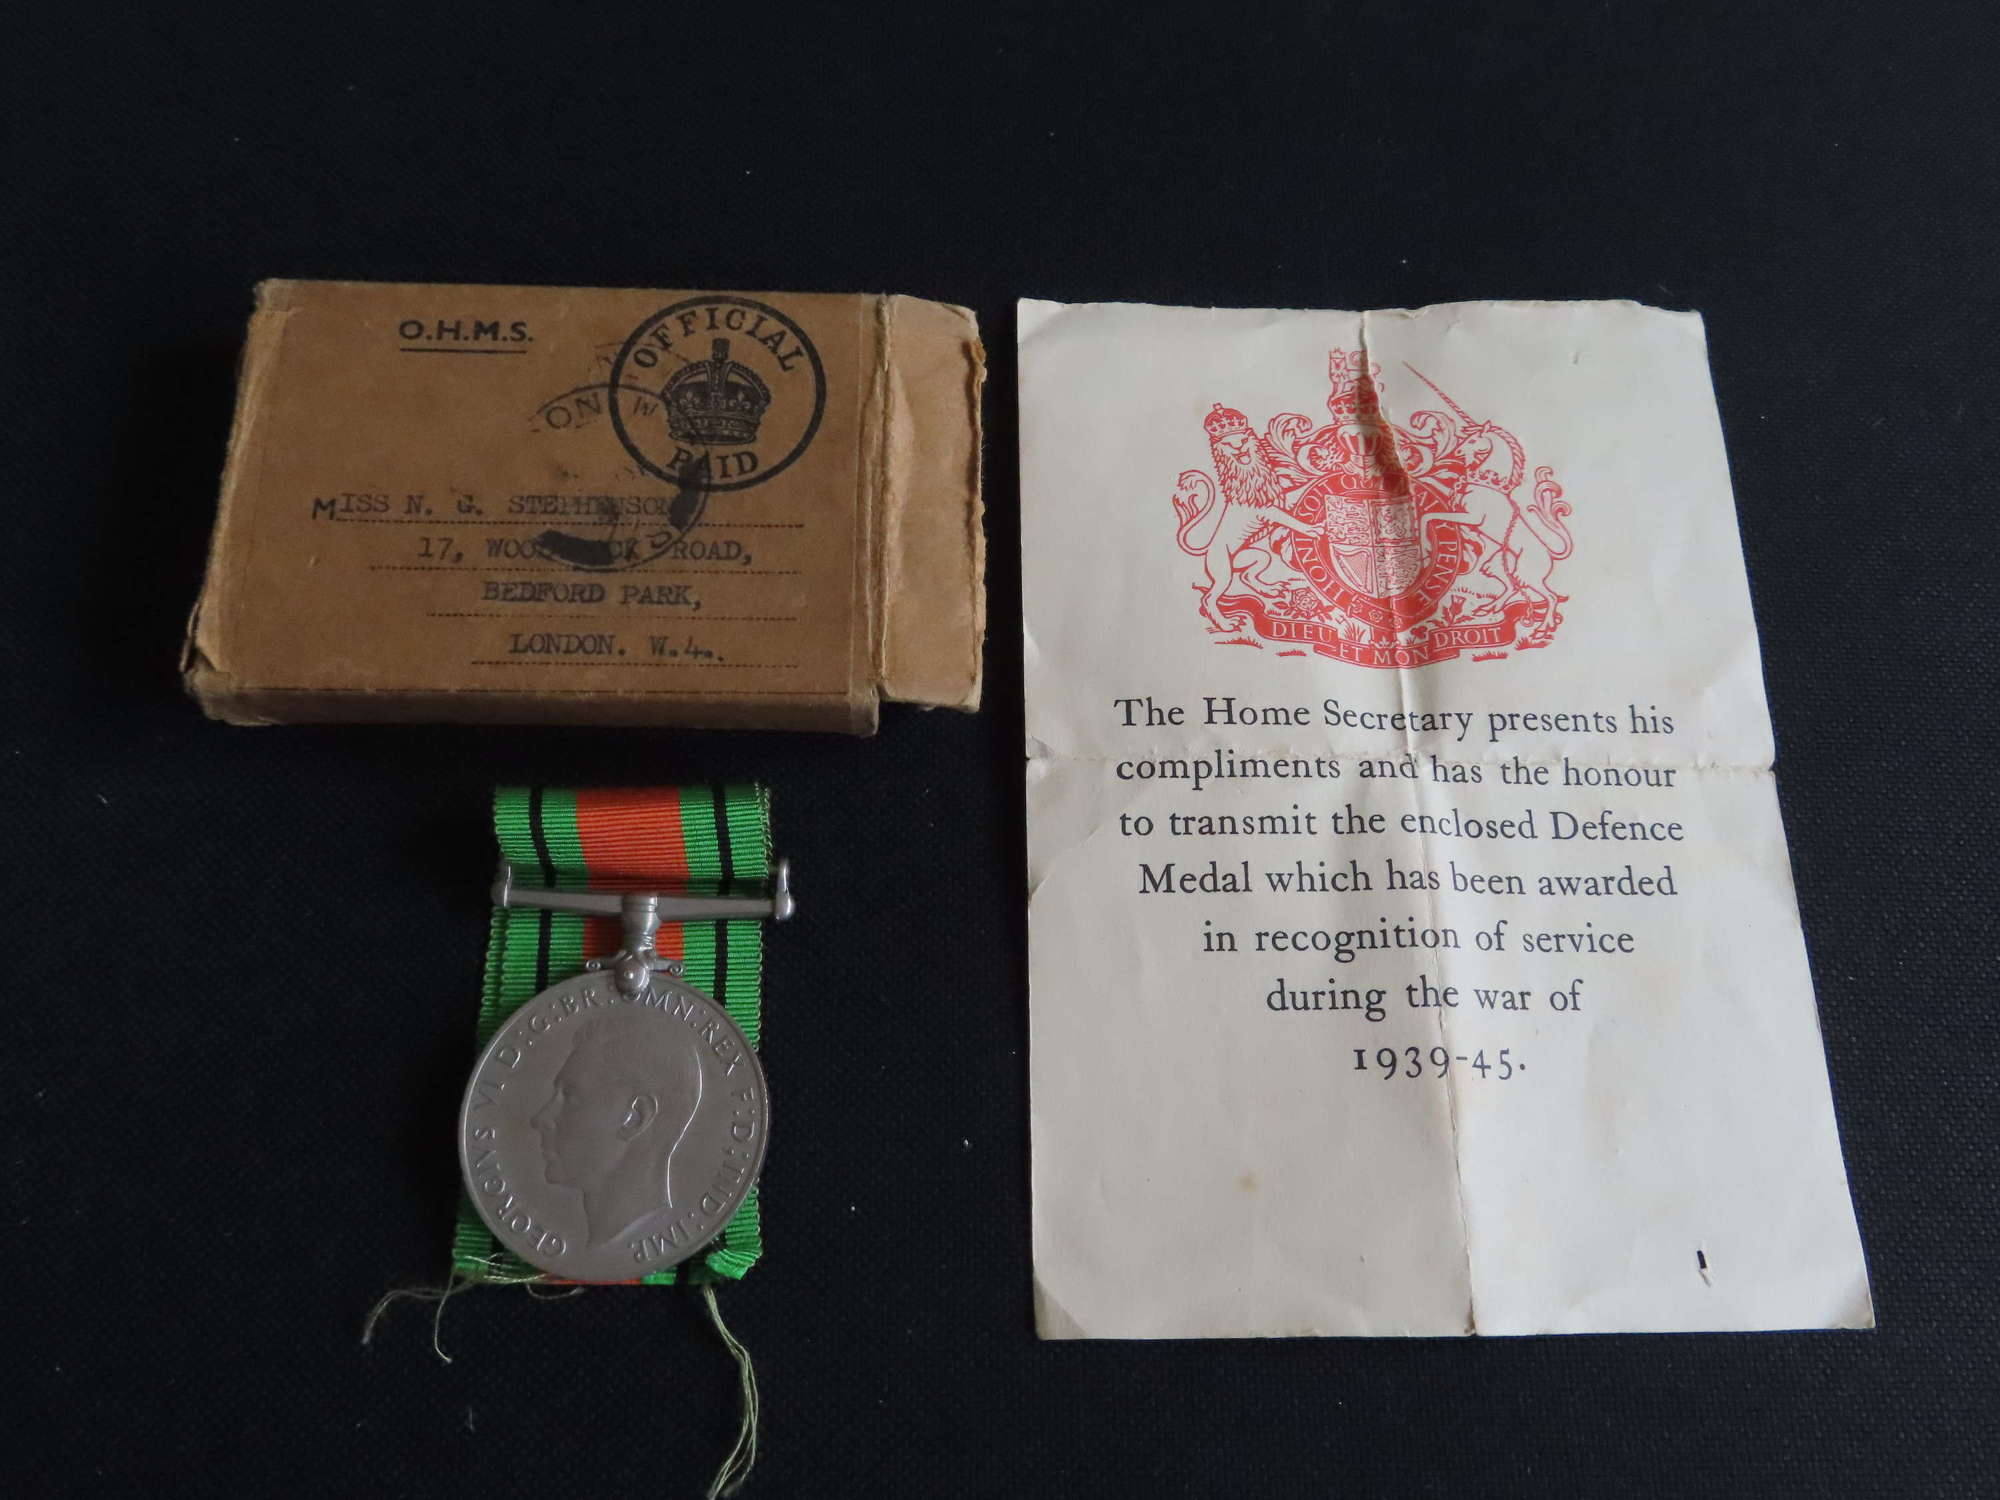 WW2 Boxed Genuine Defence Medal to Miss N G Stephenson from London